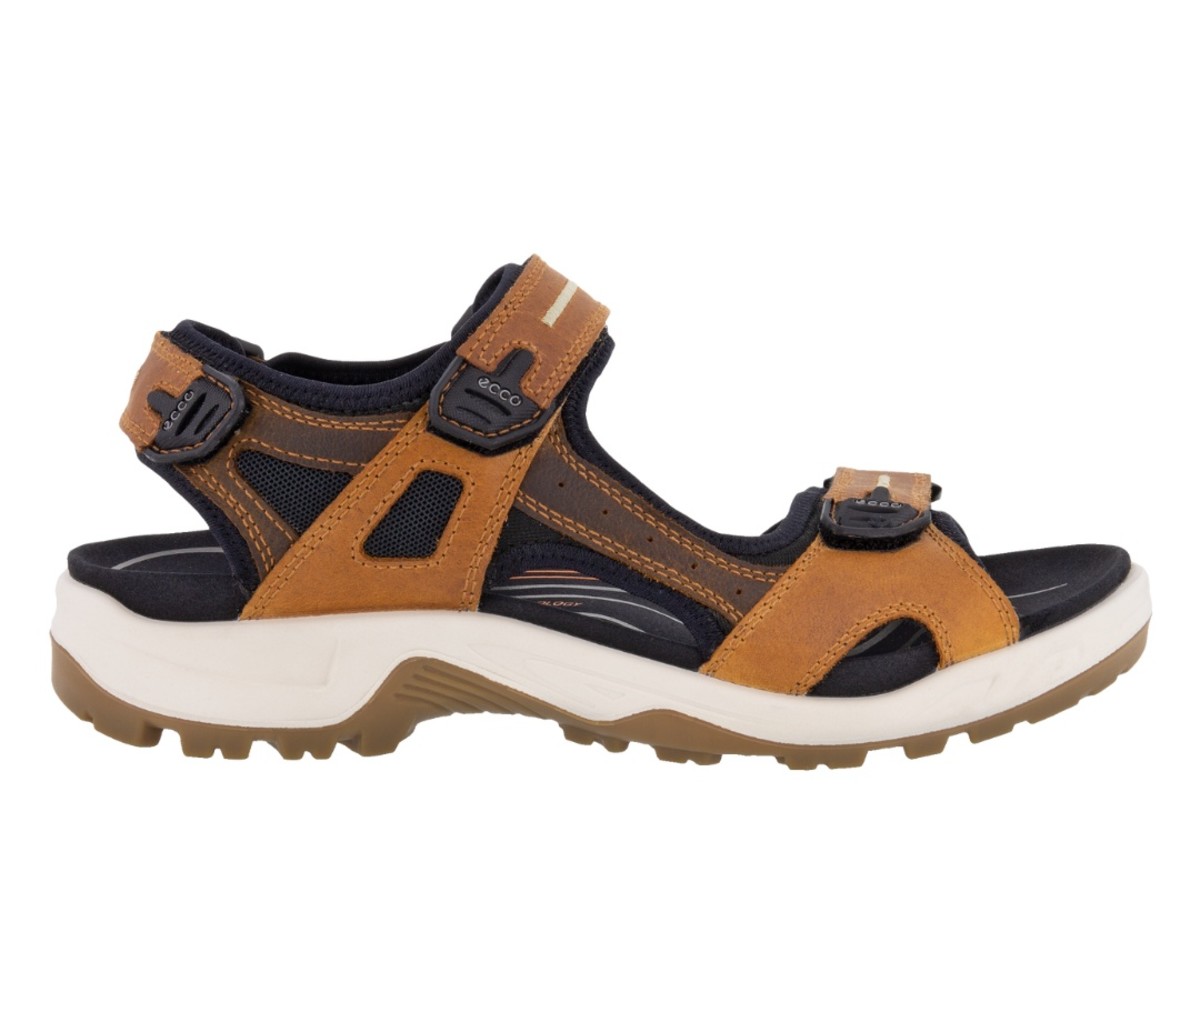 Chaco Classic vs. Cloud: A Review of Chaco's Two Popular Hiking Sandals